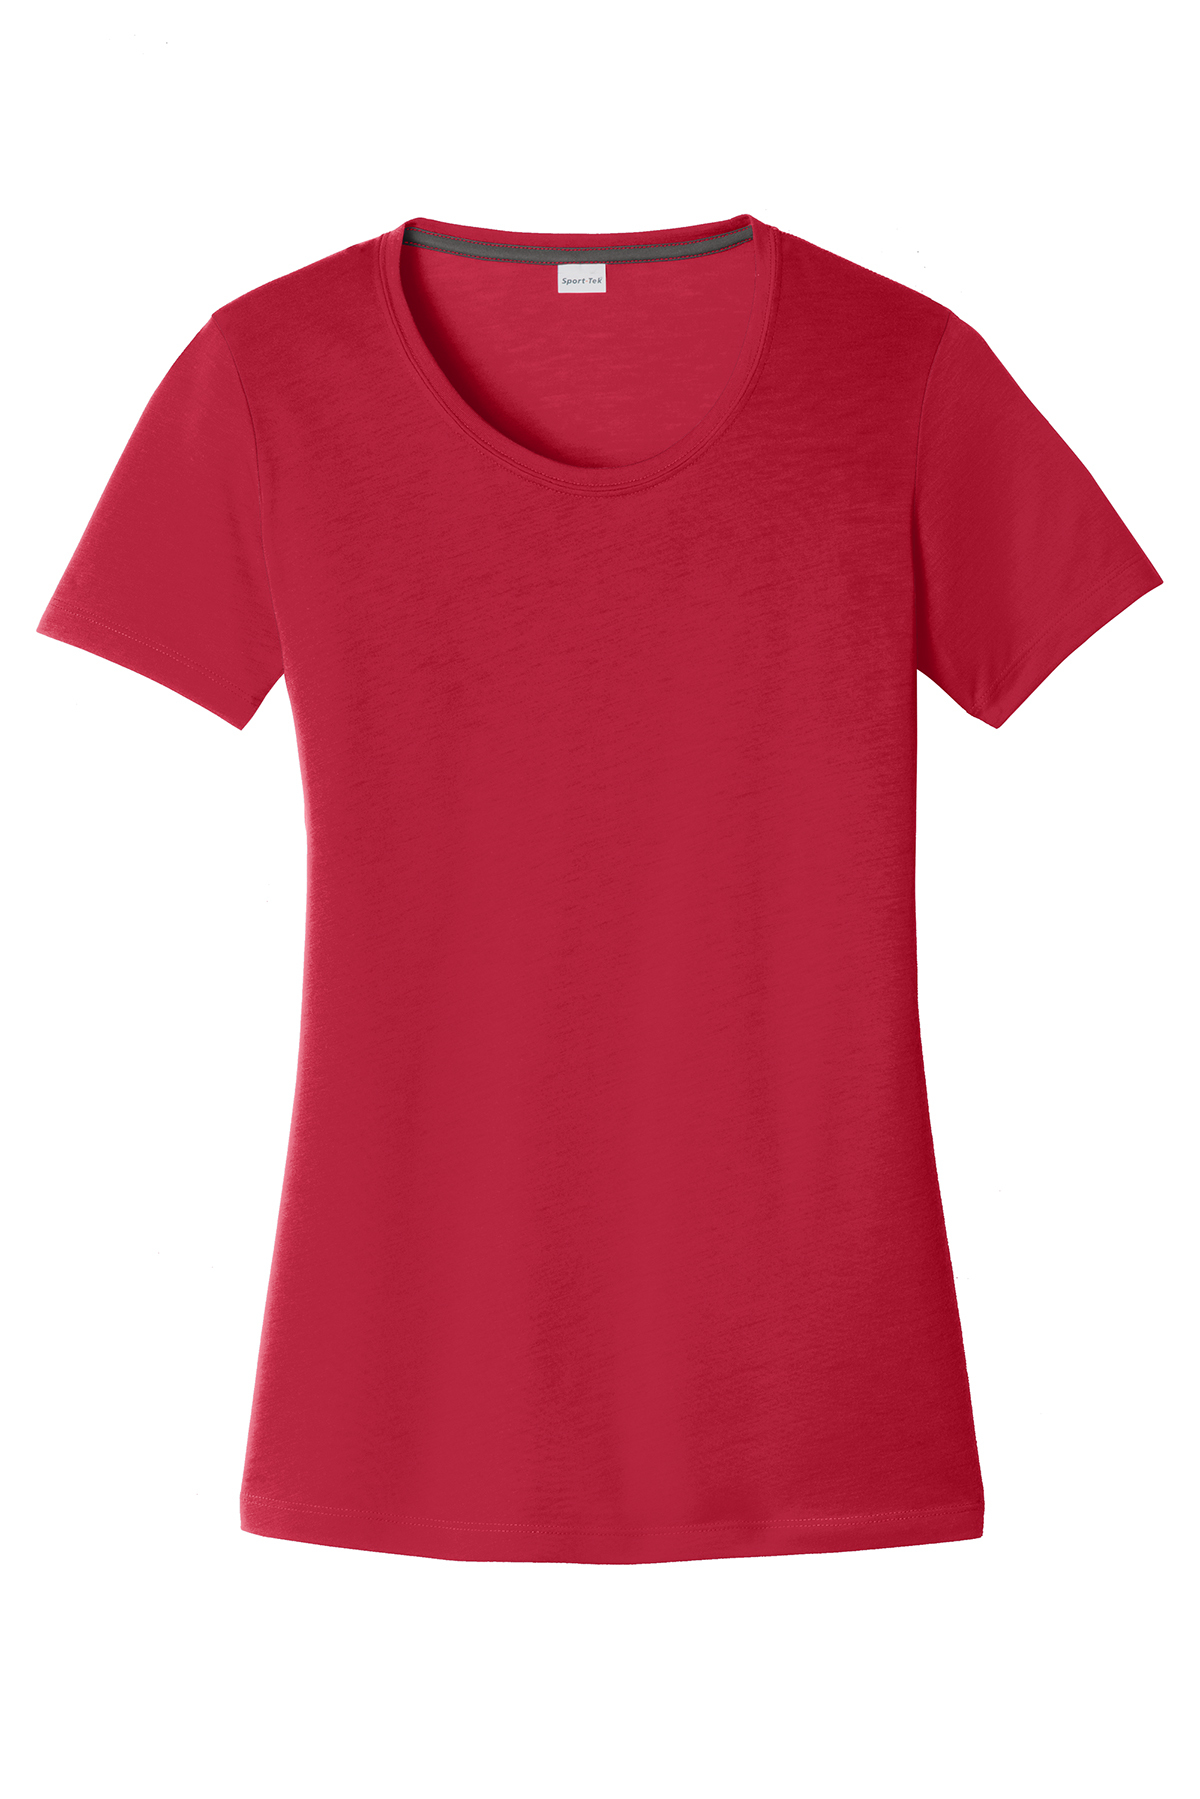 Sport-Tek Ladies PosiCharge Competitor™ Cotton Touch™ Scoop Neck Tee ...